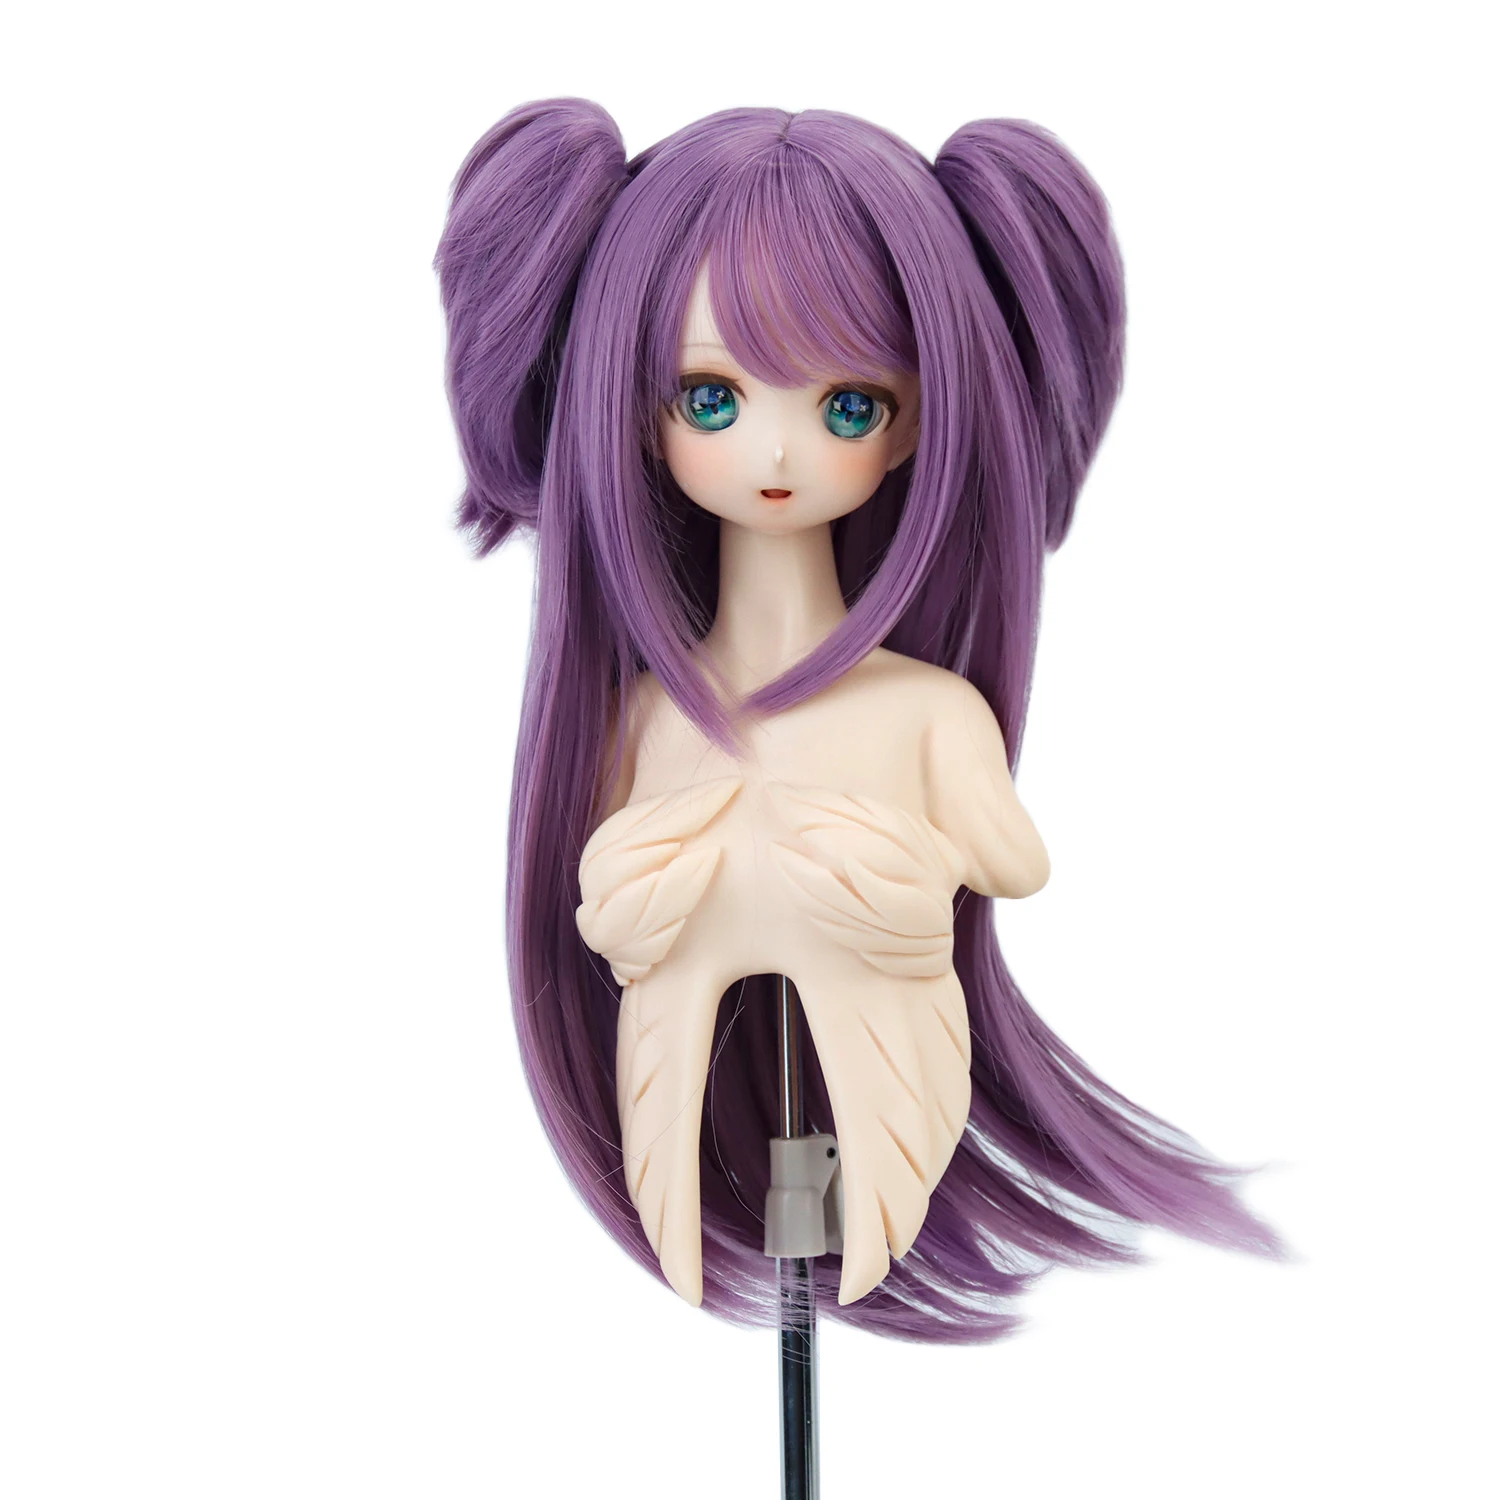 Aidolla New BJD Doll Wig 1/3 8-9inch Long Hair Purple for BJD/ SD/Smart Doll/MSD/Dollfie Dream/Yosd Doll Accessories red hot chili peppers return of the dream canteen purple 2винил